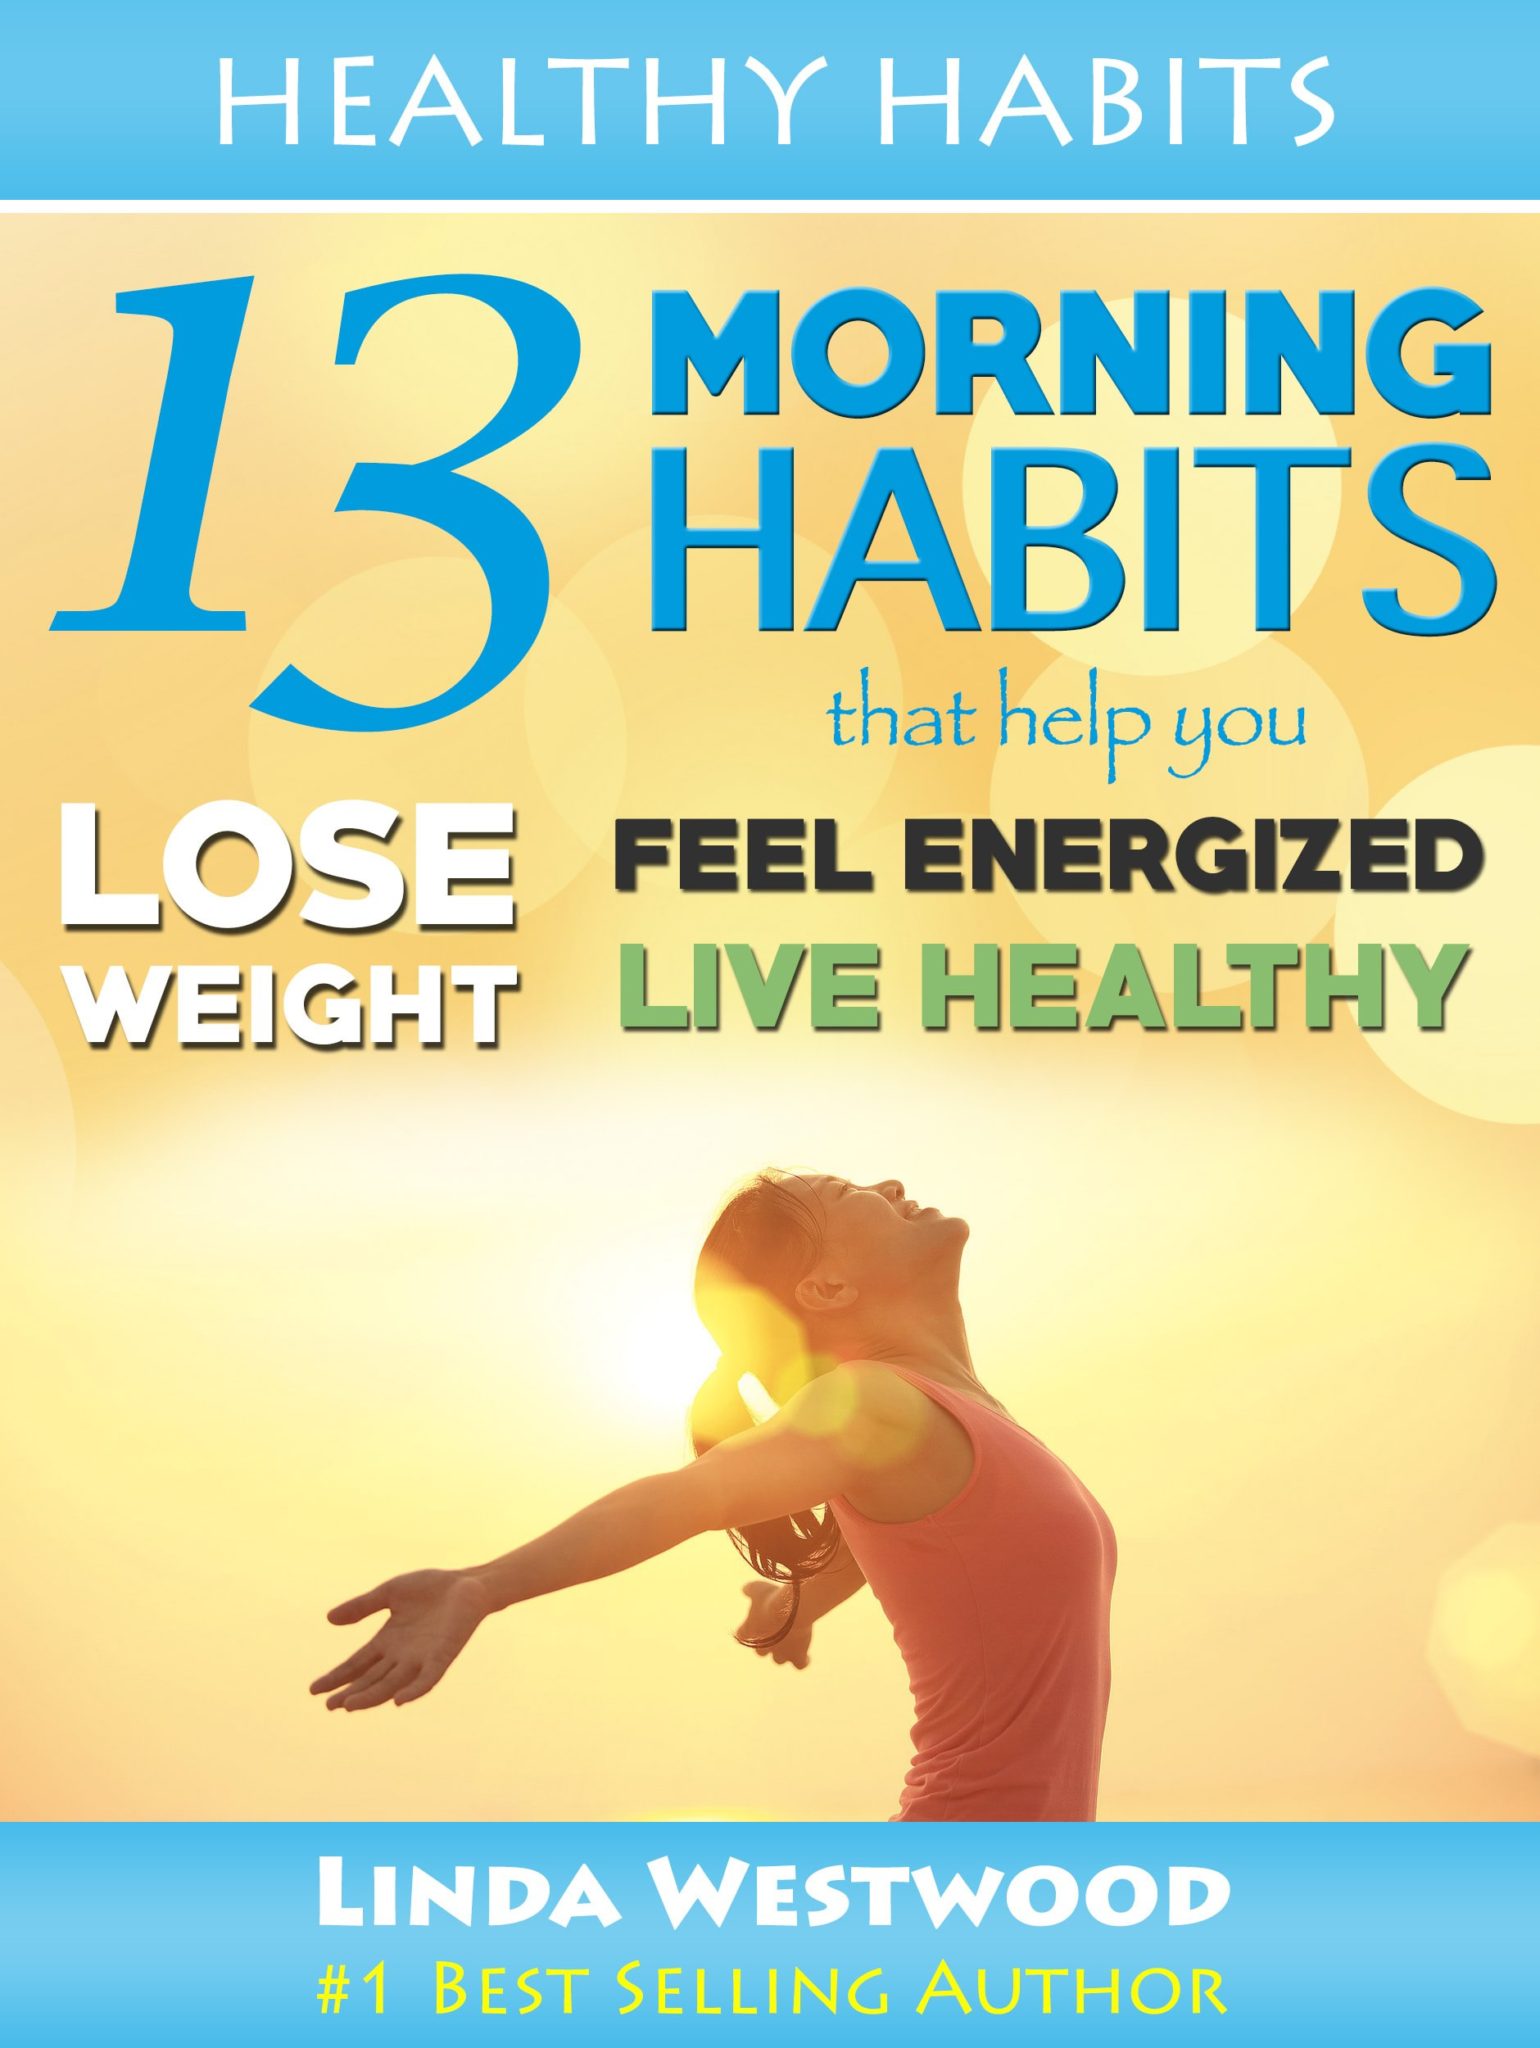 FREE: Healthy Habits Vol 1: 13 Morning Habits That Help You Lose Weight, Feel Energized & Live Healthy! by Linda Westwood